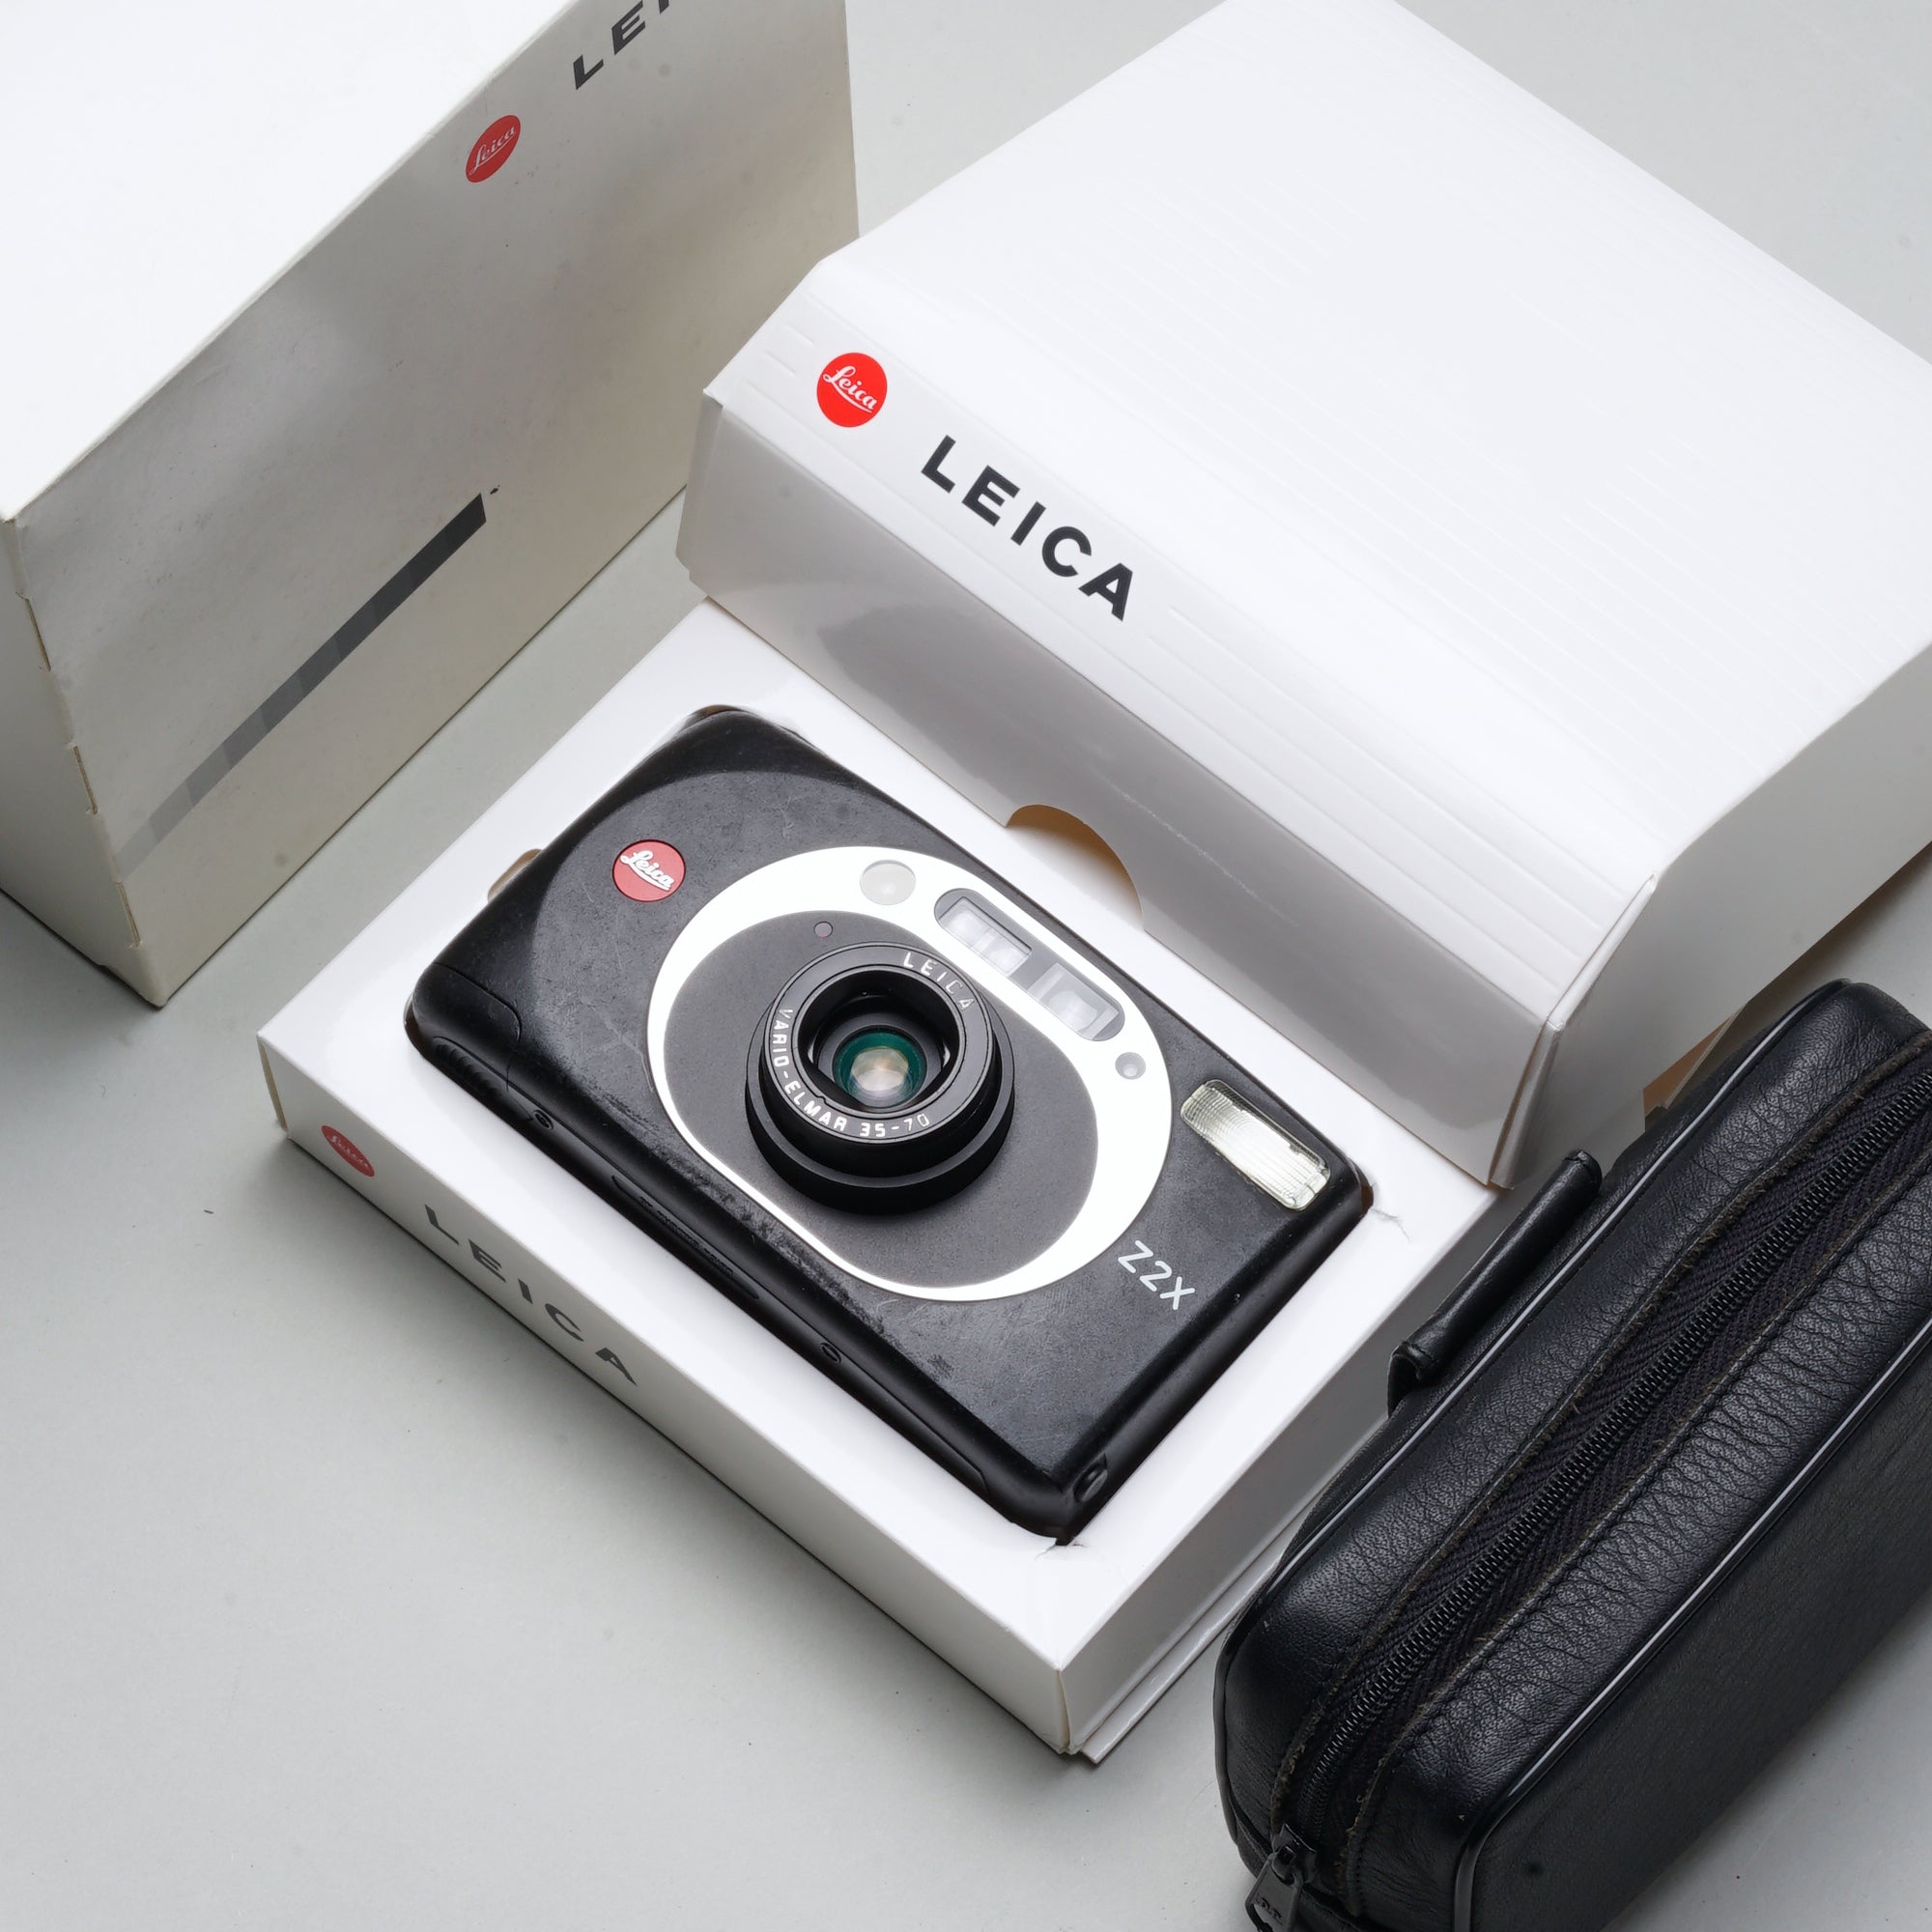 Buy Leica Z2X Black now at Analogue Amsterdam